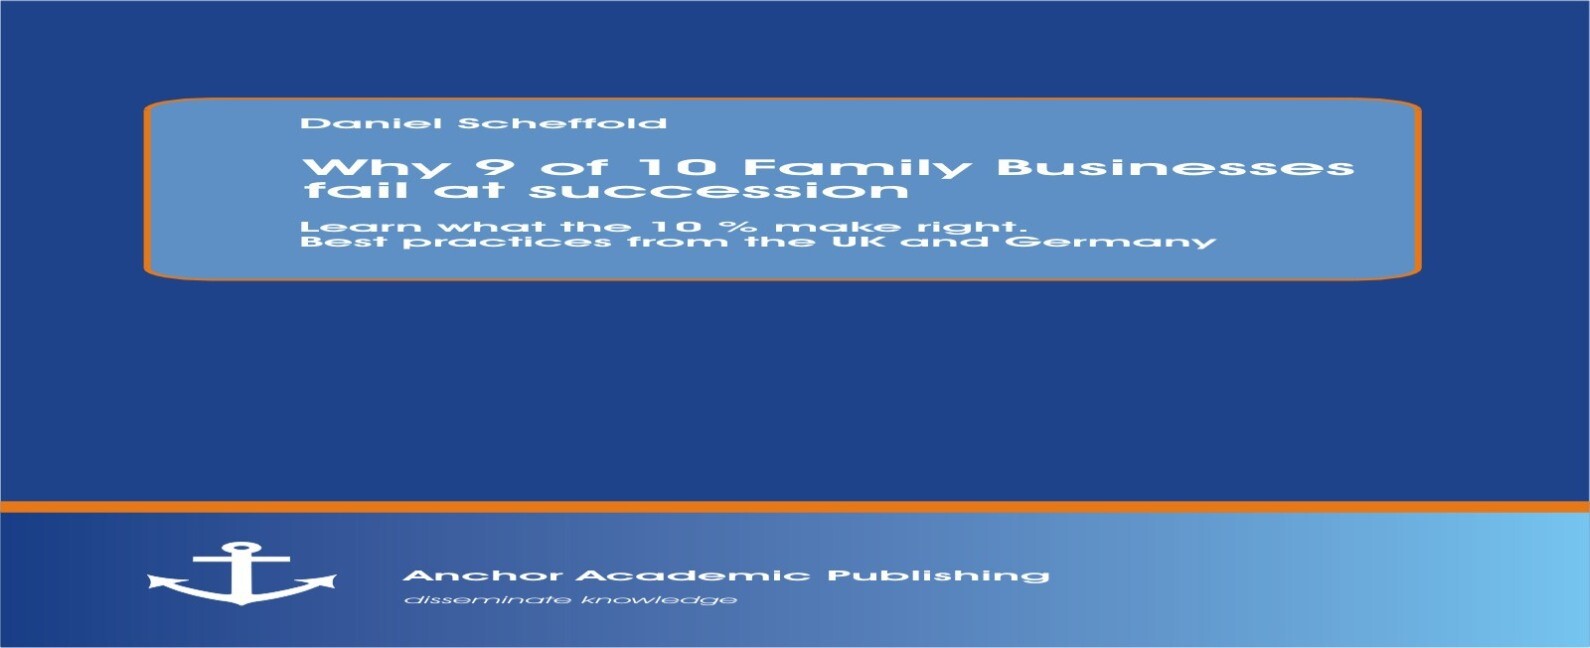 Why 9 of 10 Family Businesses fail at succession: Learn what the 10 % make right. Best practices from the UK and Germany